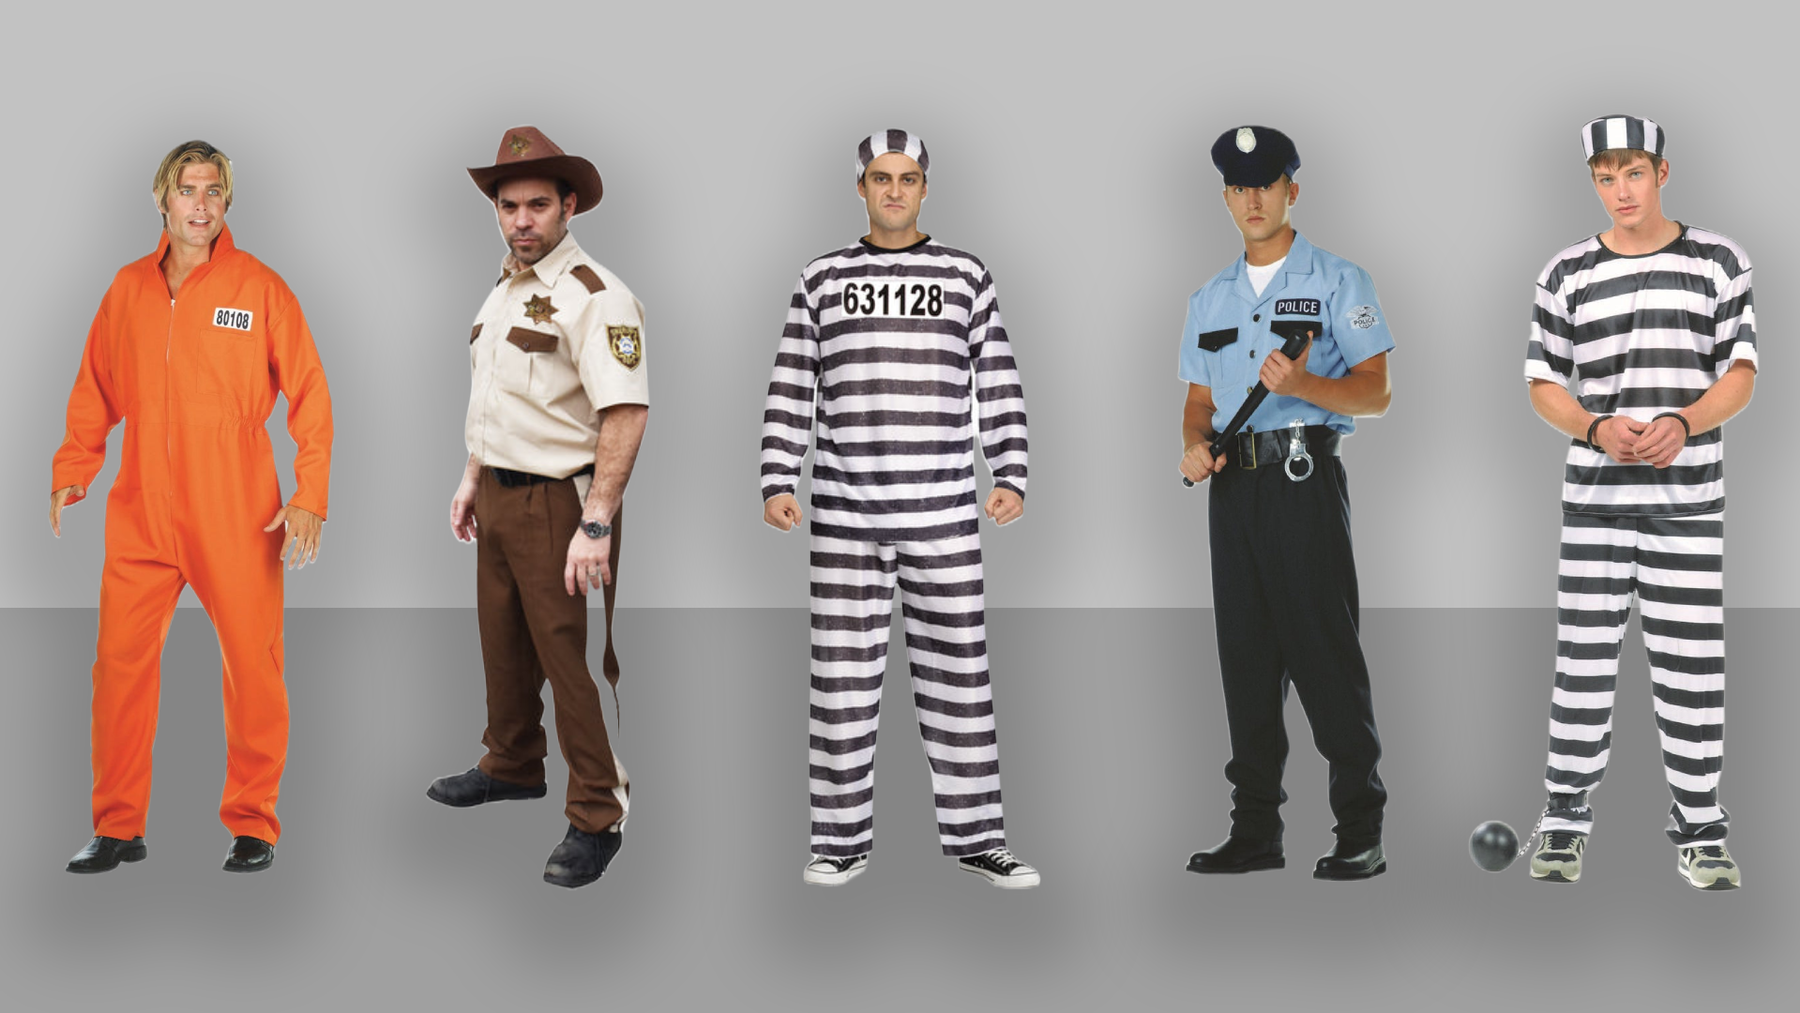 Arrest Attention with Our Top 5 Men's Police Costumes